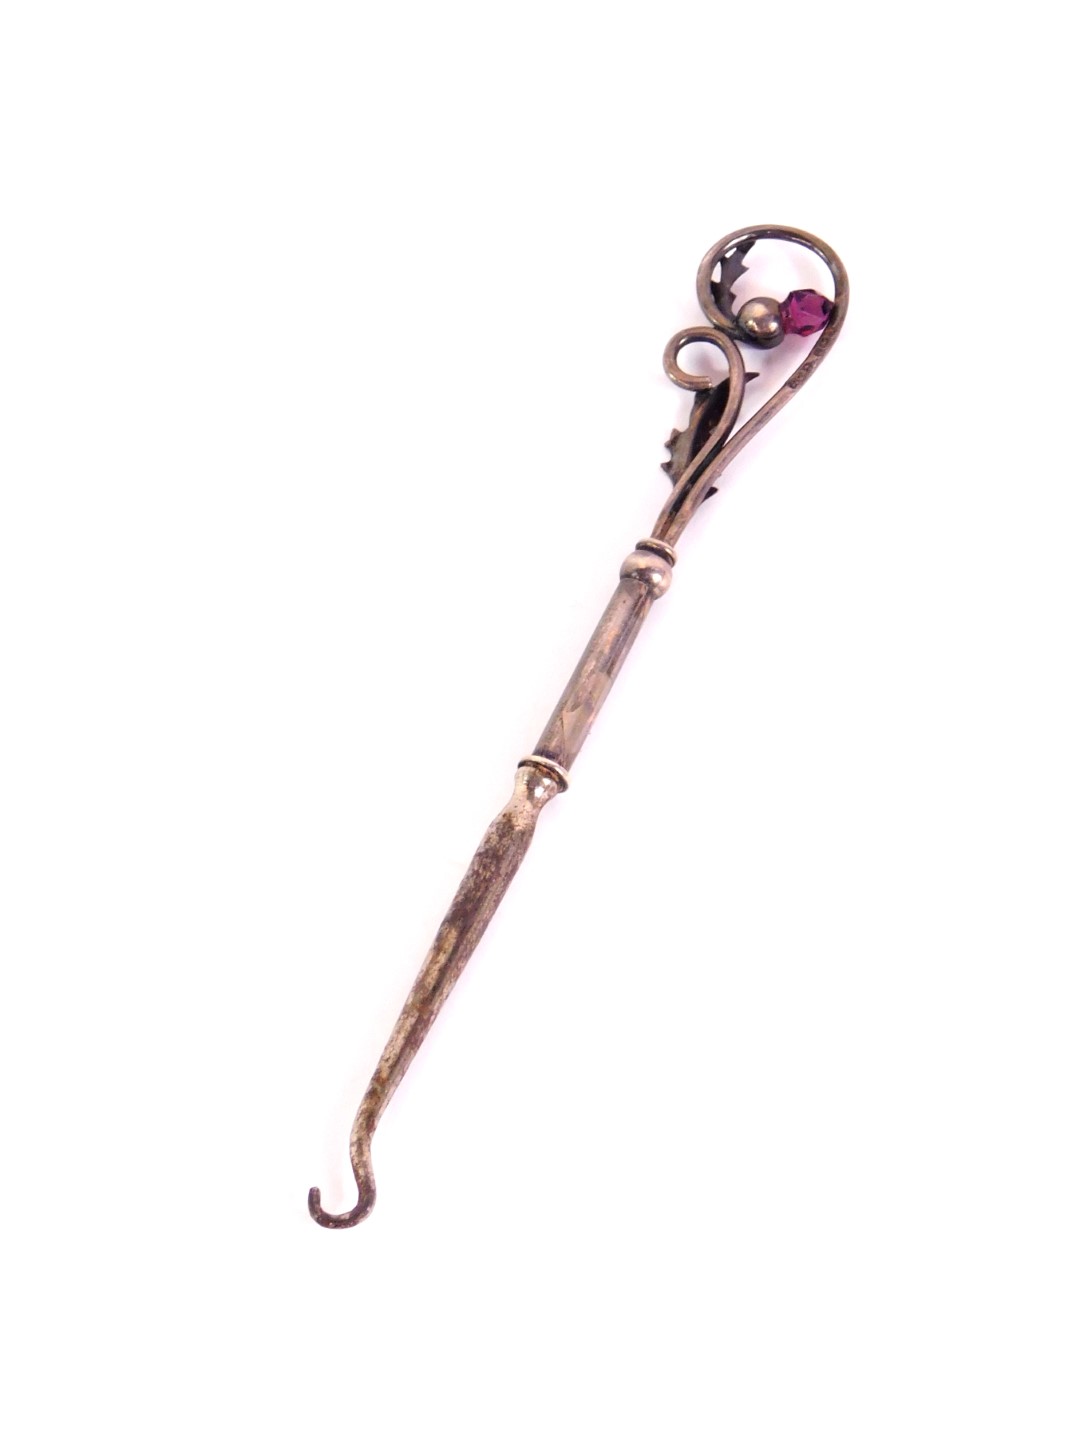 Withdrawn pre-sale by executors-An Edward VII silver button hook,